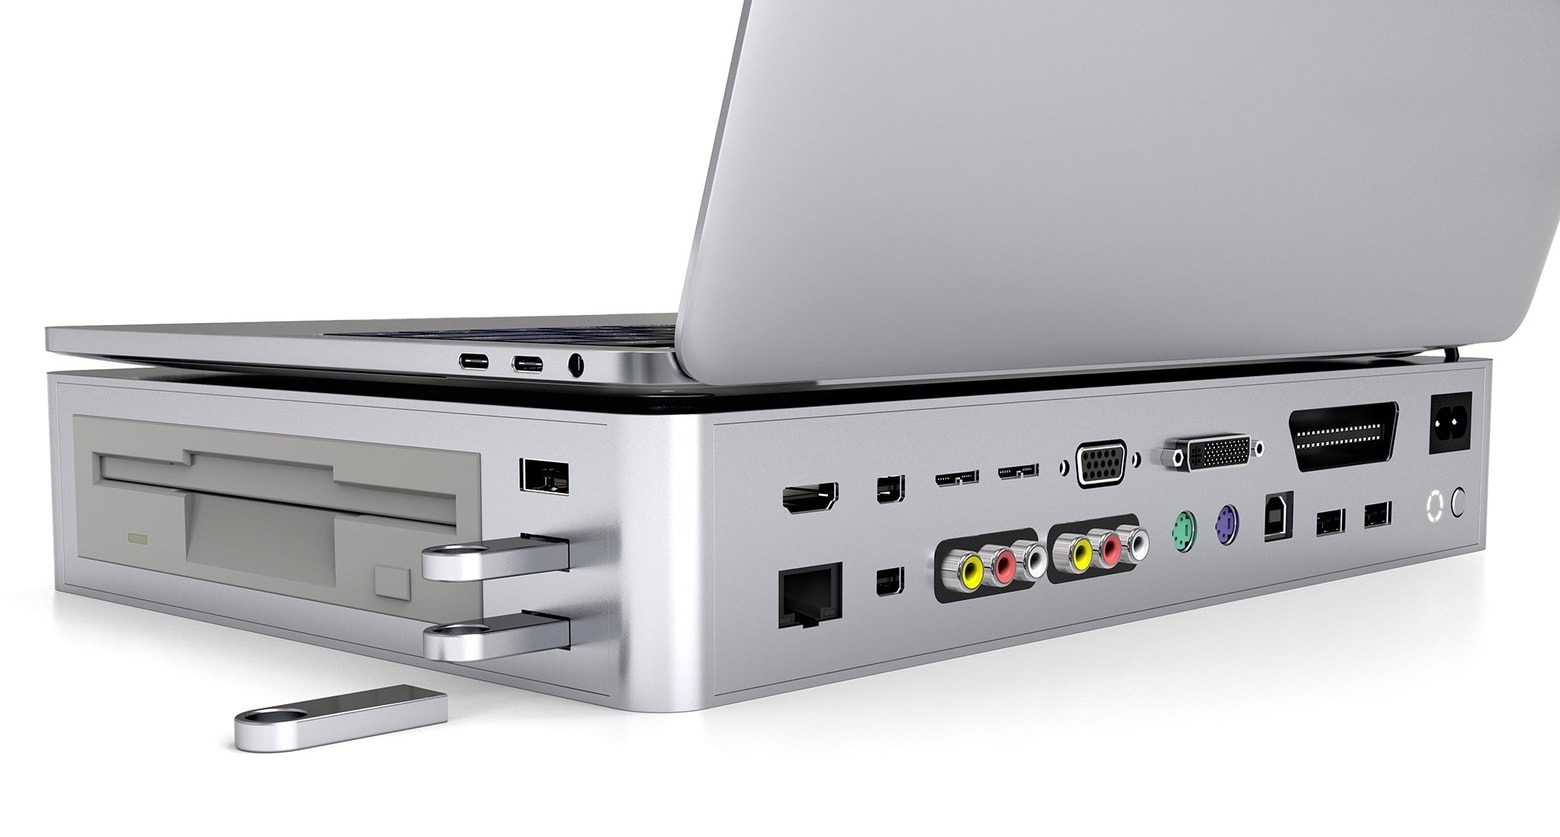 This USB-C hub has everything but the kitchen sink.